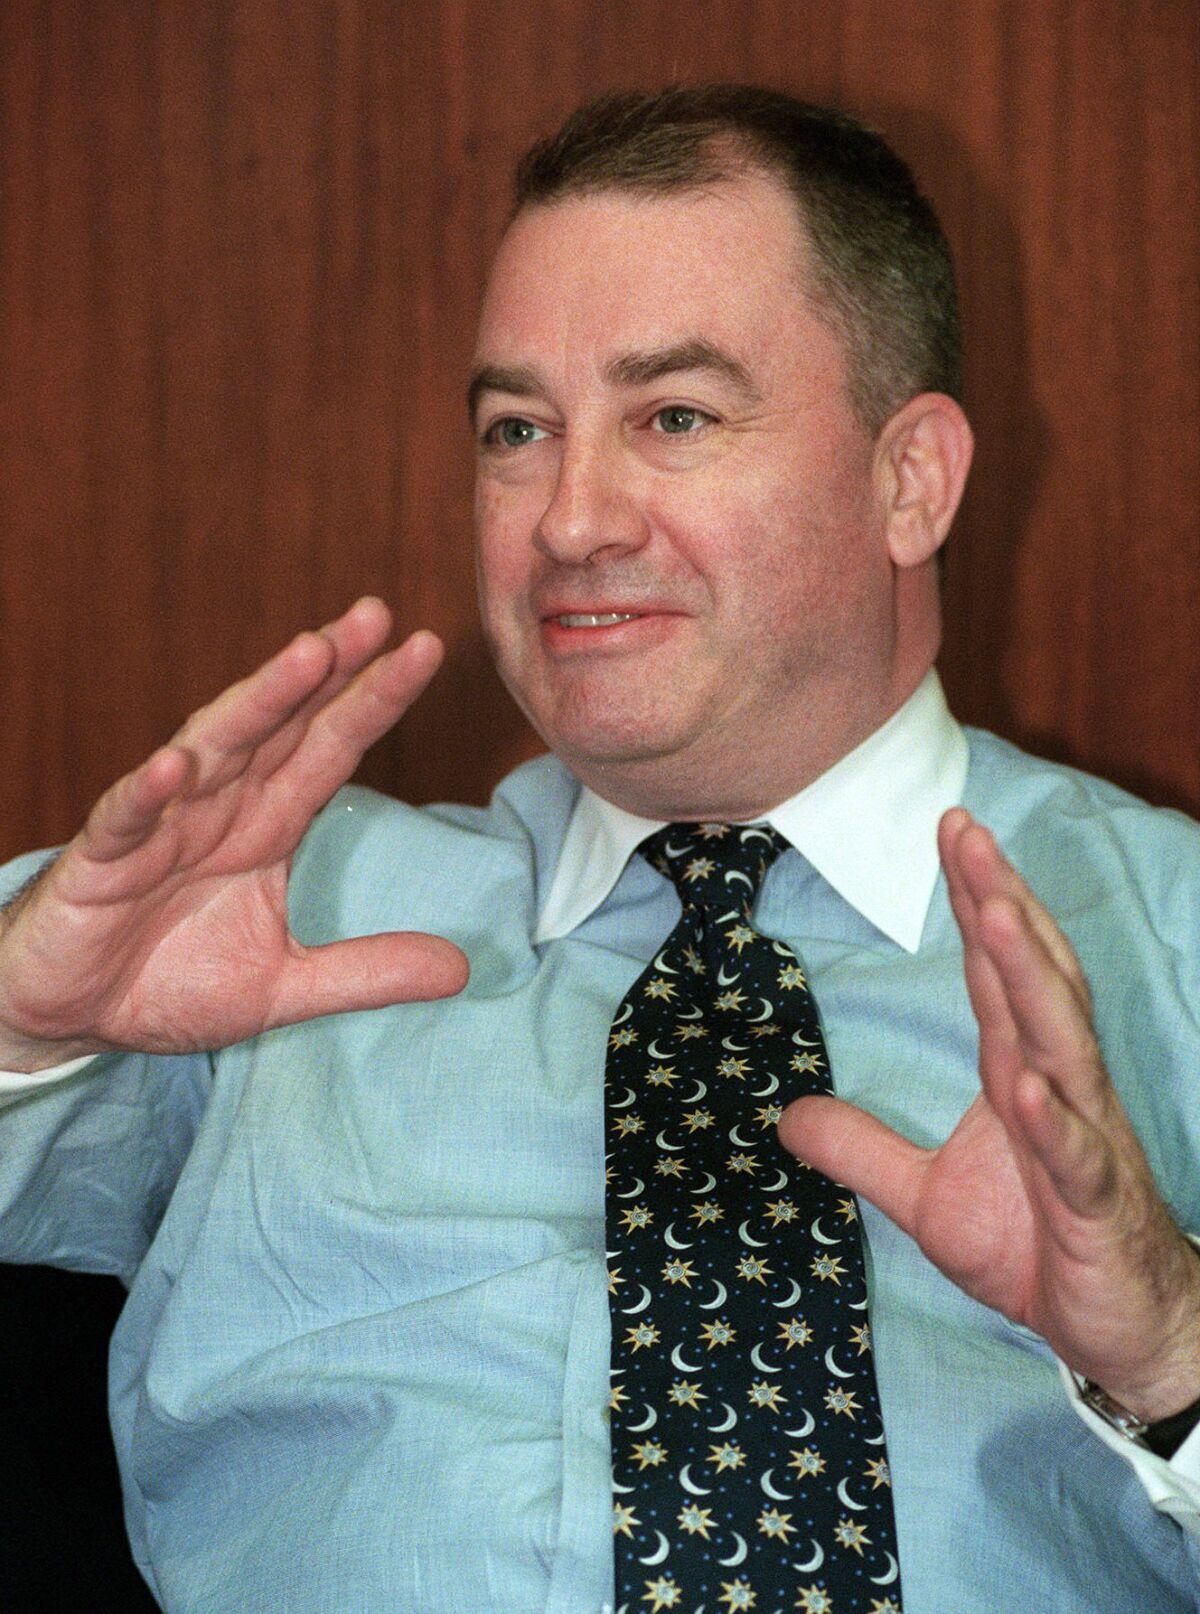 FILE - Los Angeles Times Editor Michael Parks speaks during an interview at the Los Angeles offices of the Times Monday, Oct. 13, 1997. Parks, who won a Pulitzer Prize for his reporting on the struggle to end apartheid in South Africa and later led the Los Angeles Times during a tumultuous period that ended when the Chandler family sold the newspaper after a century of control, died on Saturday. He was 78. (AP Photo/Susan Sterner, File)